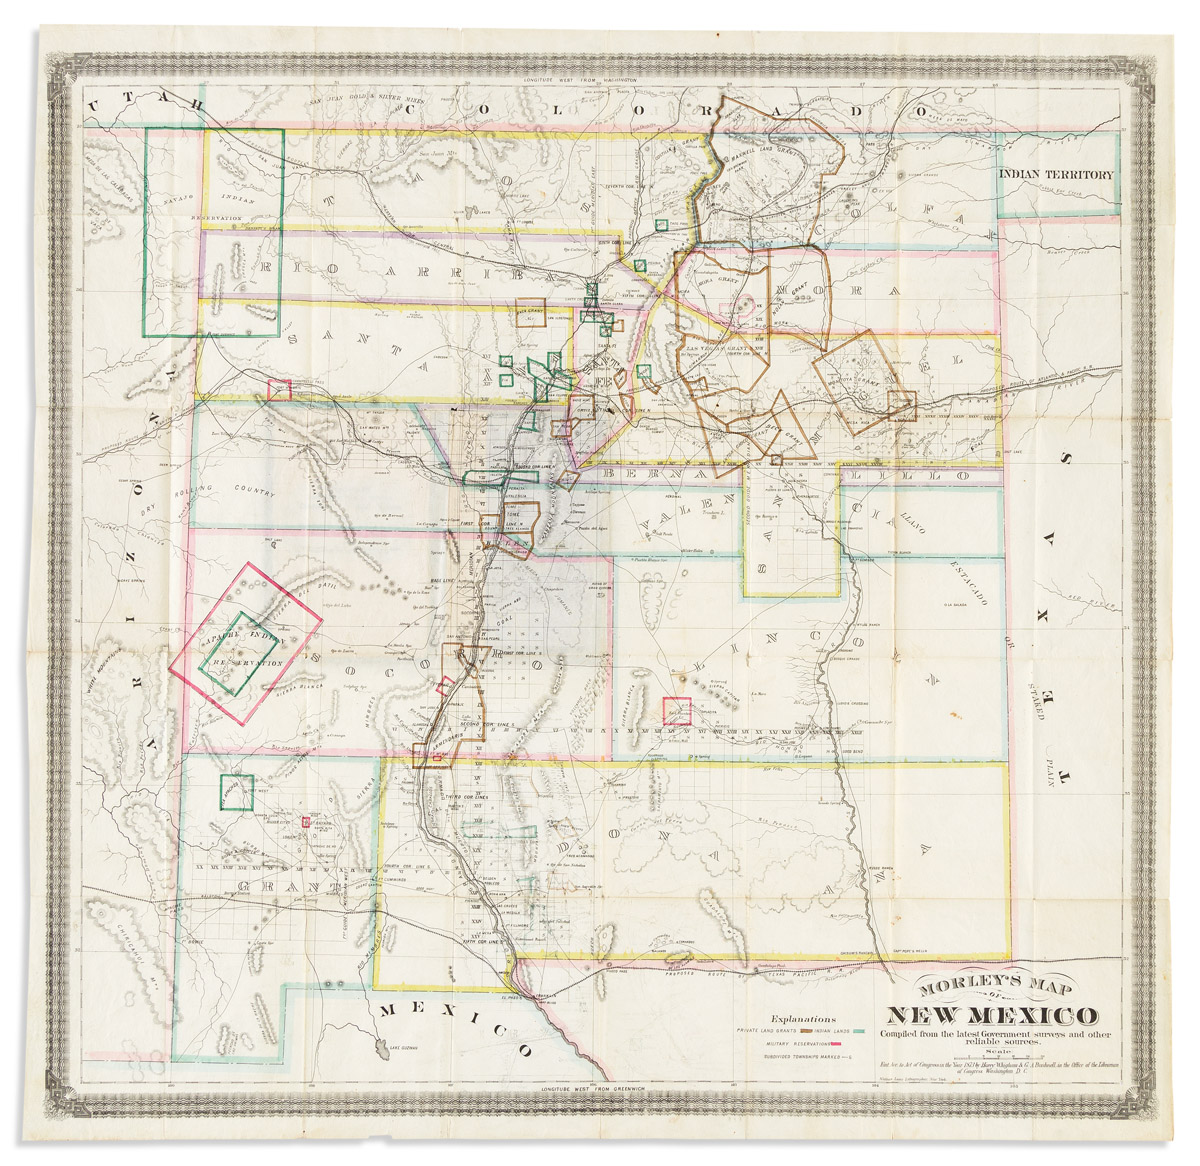 Morley's Map of New Mexico.